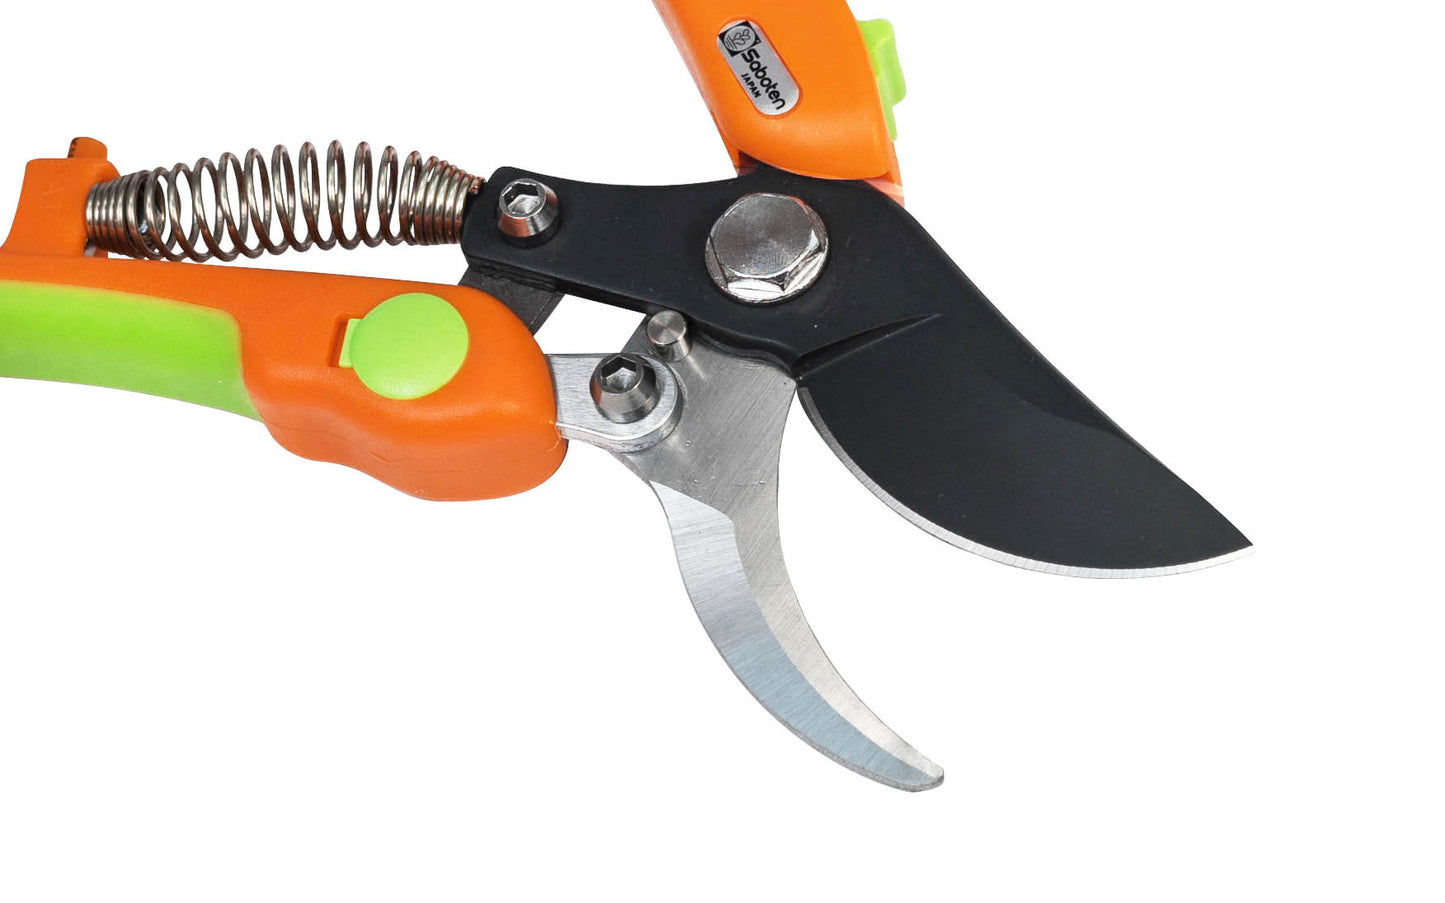 Japanese Saboten Compound-Action Bypass Pruner ~ Made in Japan · Hardened Japanese steel blade with telfon coating ~ 8" length ~ 1" cutting dia. max (live) ~ Compound-action increases cutting leverage & power